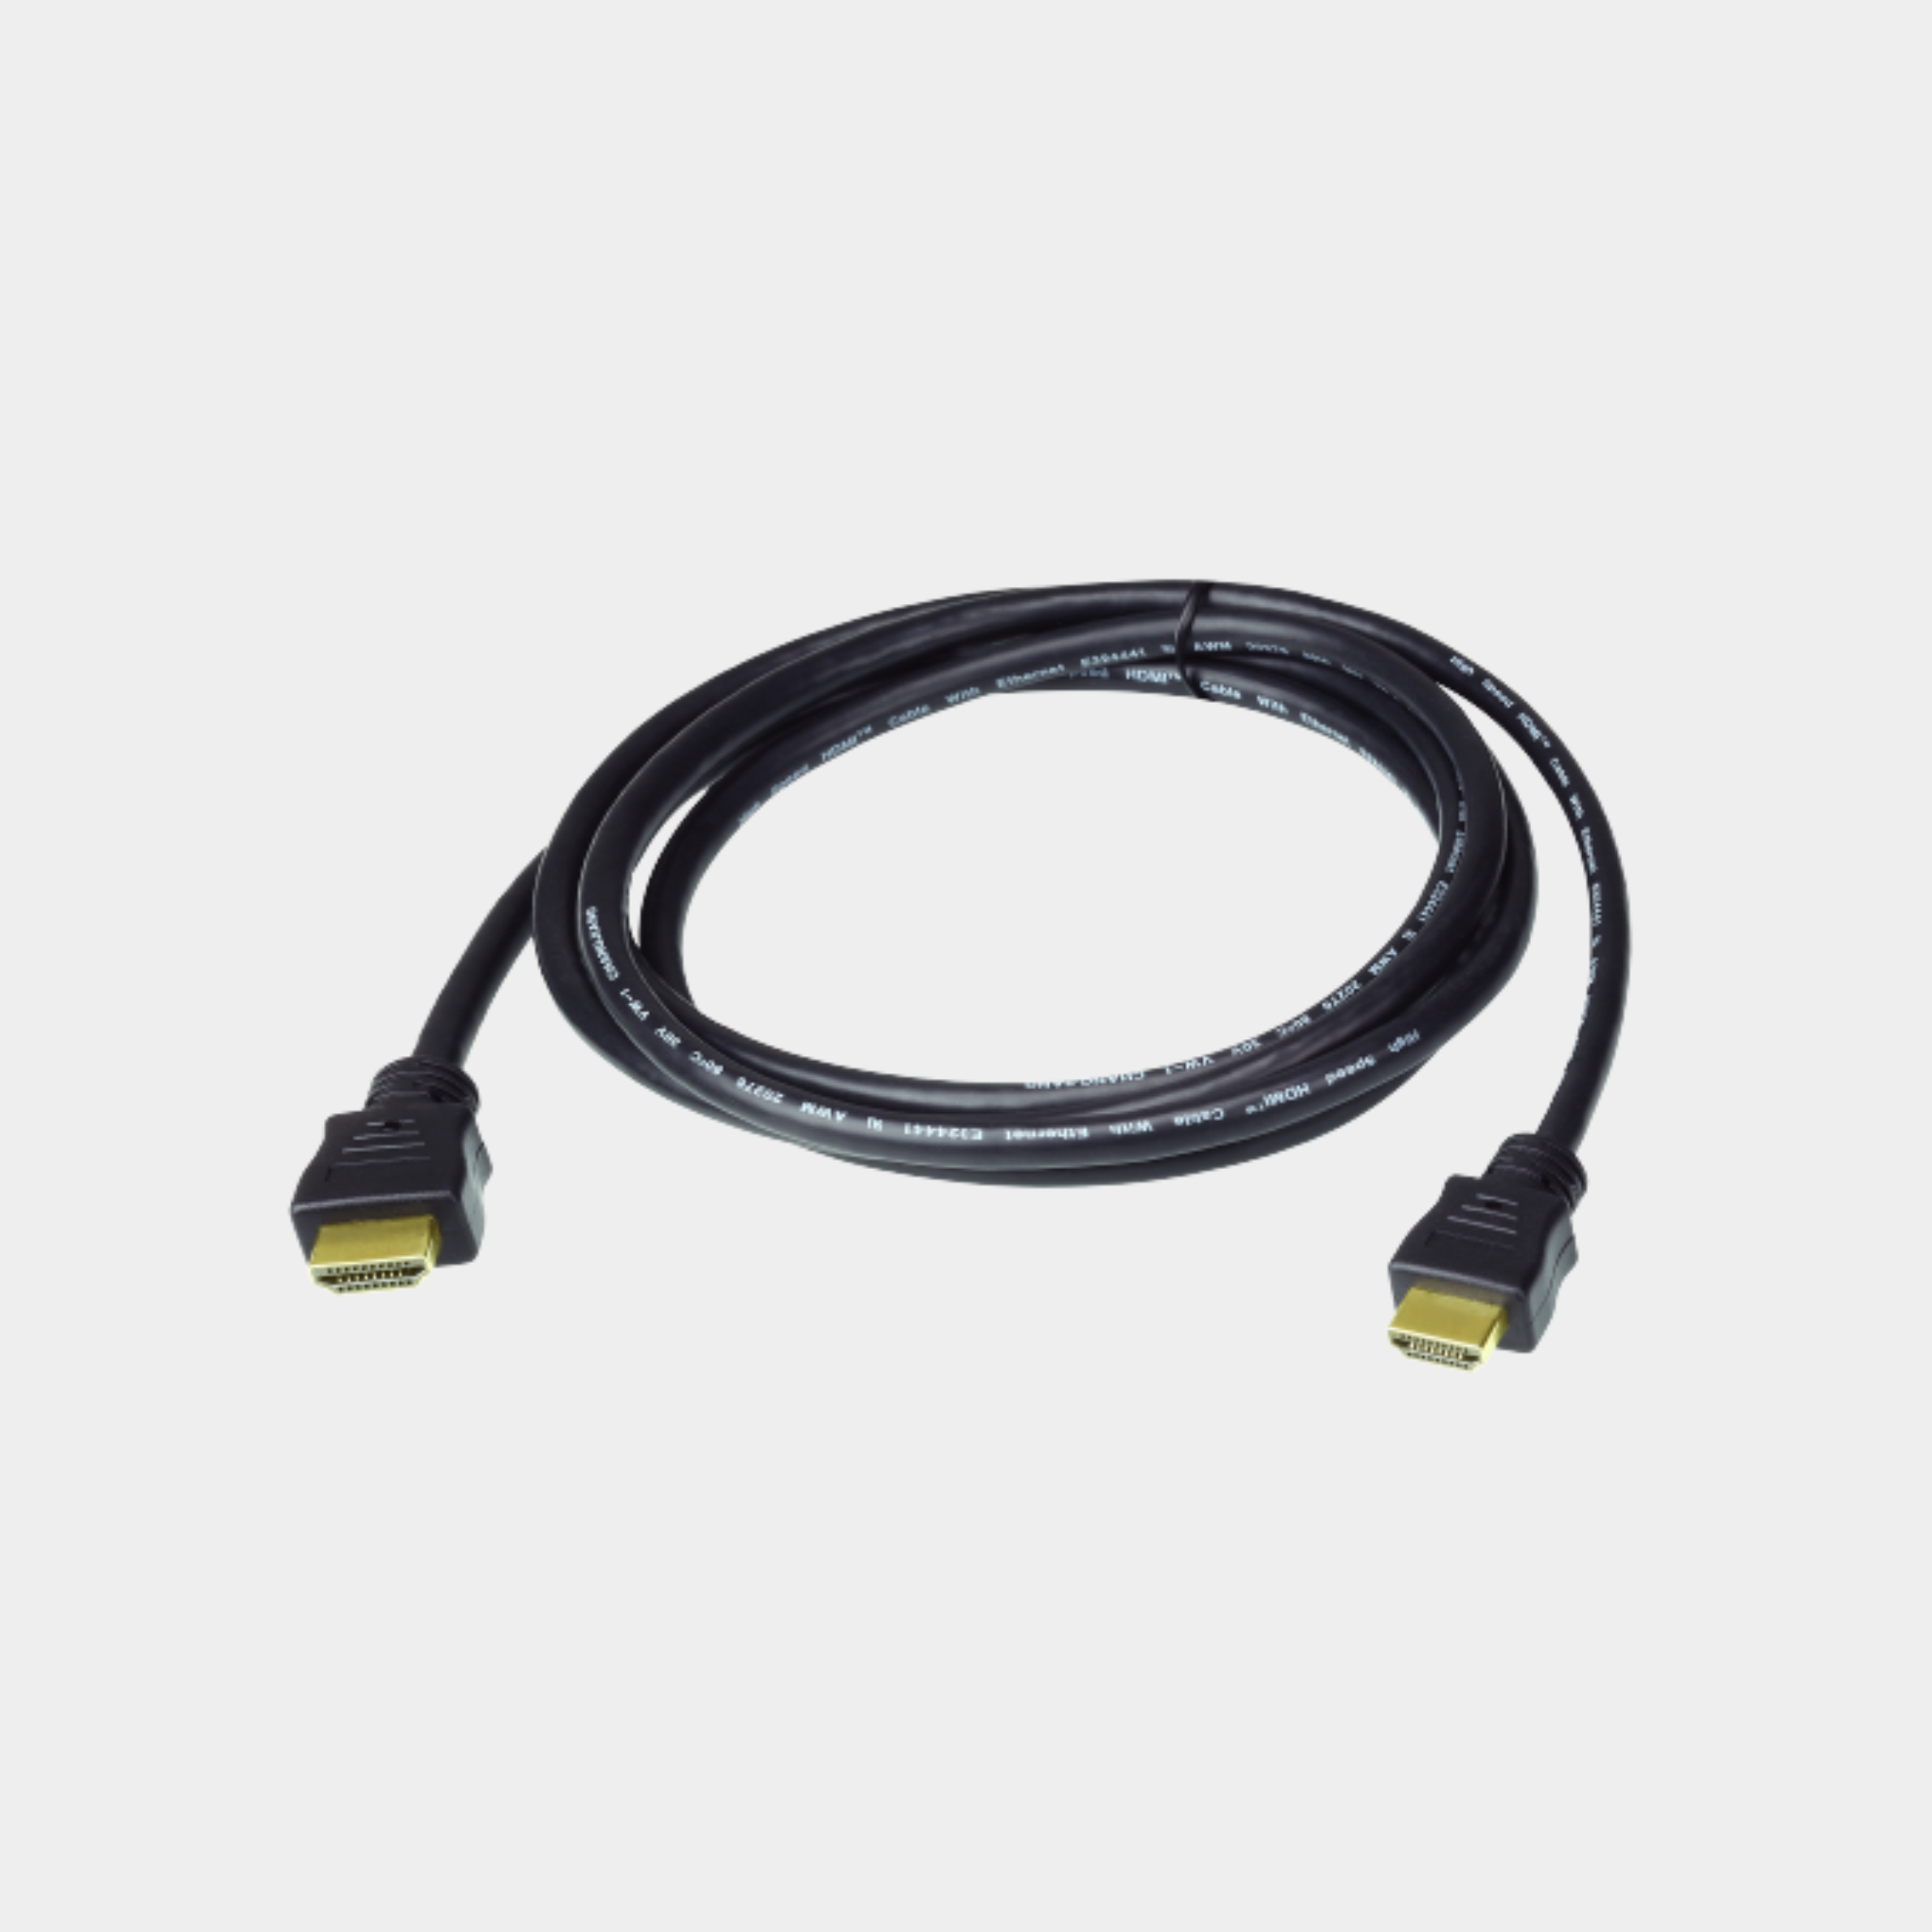 Aten 2 m High Speed True 4K HDMI Cable with Ethernet(ATEN 2L-7D02H-1)